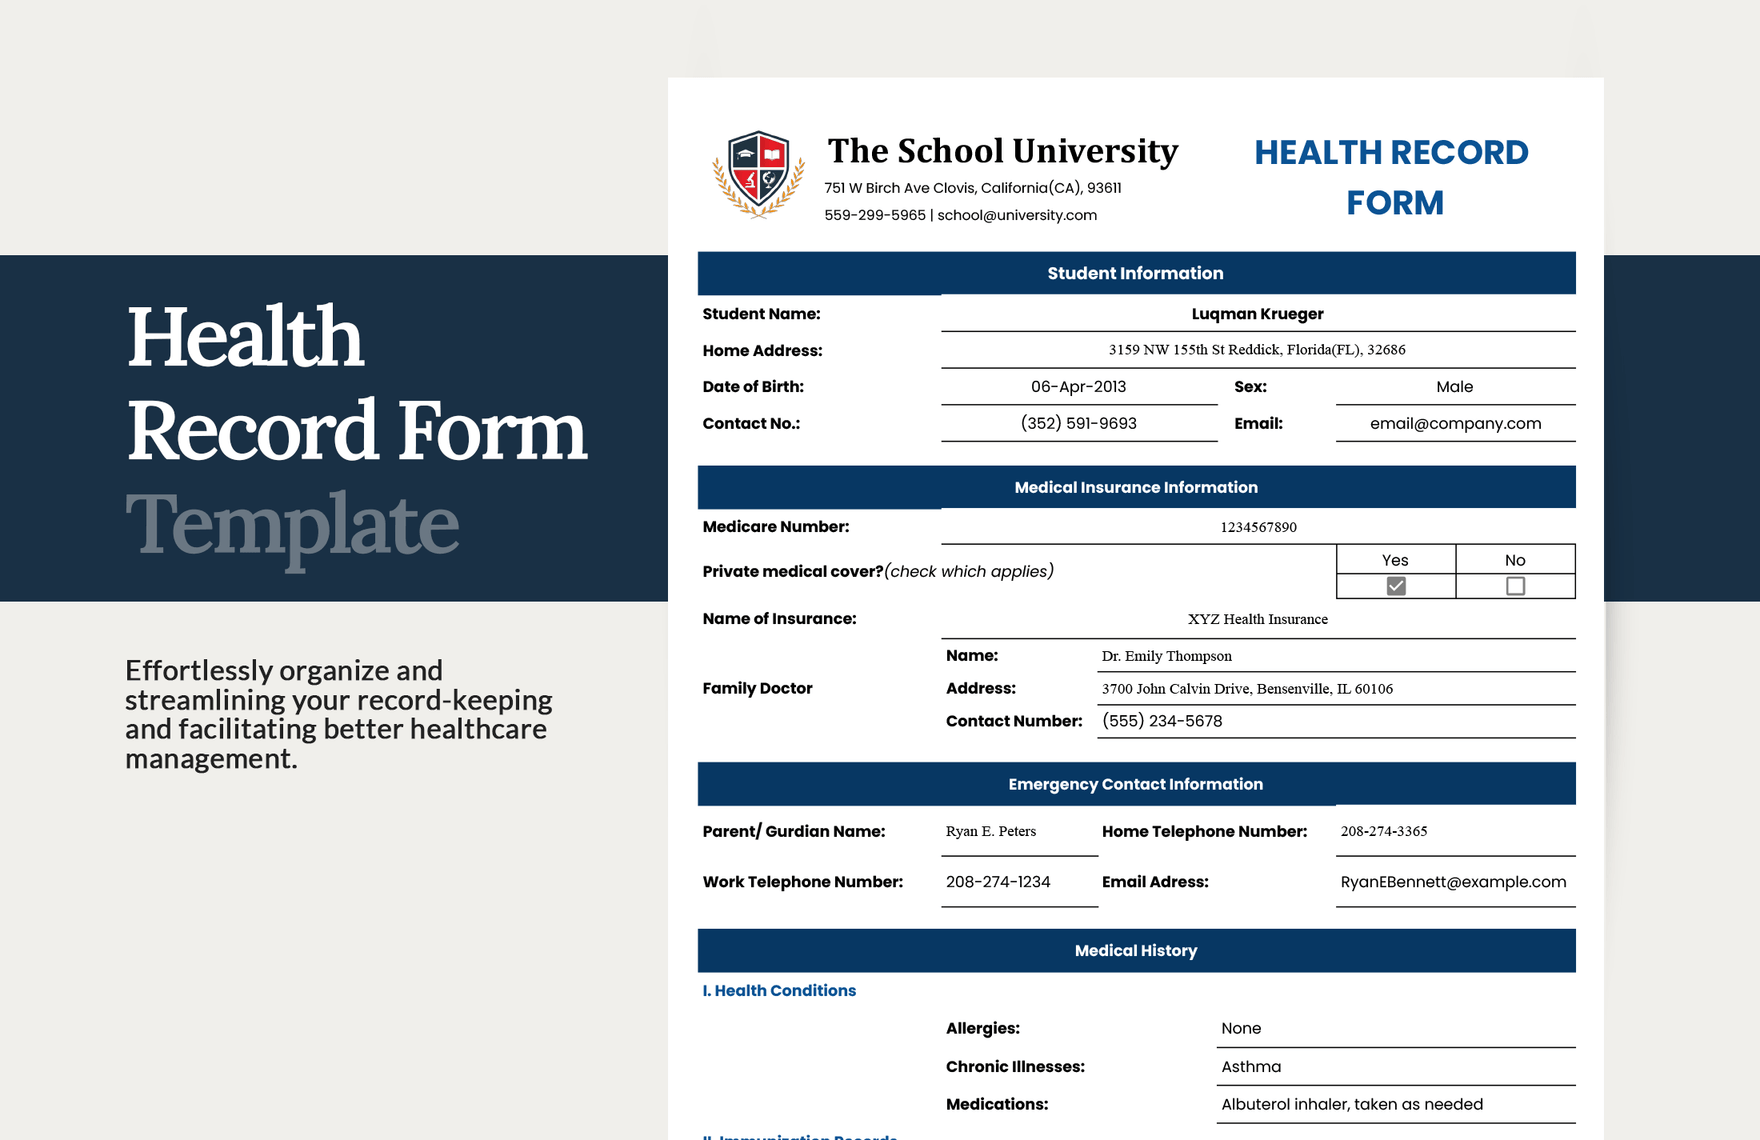 Health Record Form Template